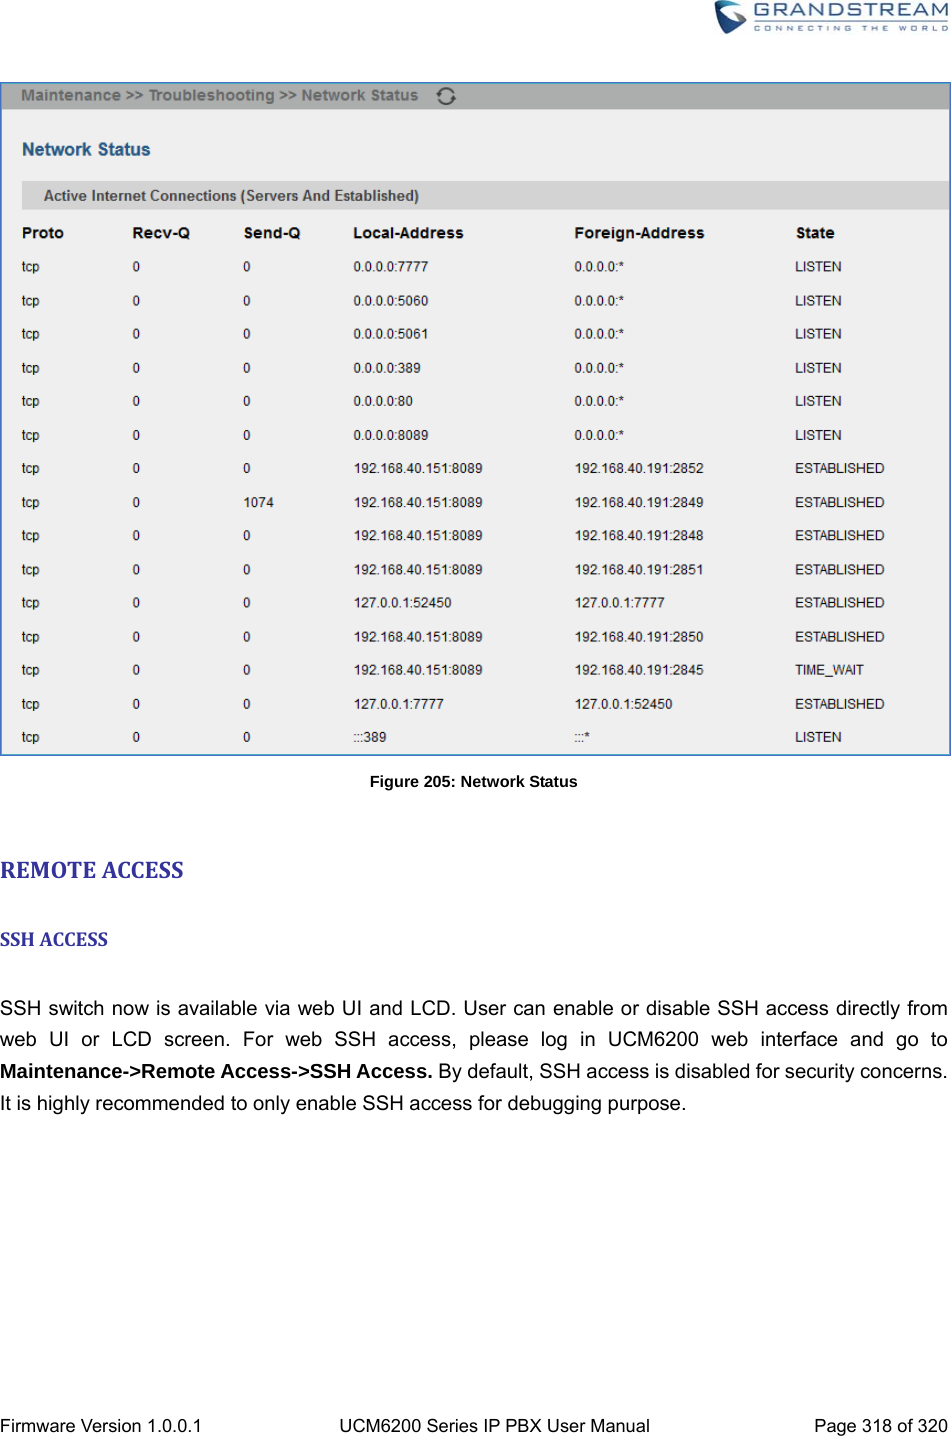  Firmware Version 1.0.0.1  UCM6200 Series IP PBX User Manual  Page 318 of 320  Figure 205: Network Status  REMOTEACCESS SSHACCESS SSH switch now is available via web UI and LCD. User can enable or disable SSH access directly from web UI or LCD screen. For web SSH access, please log in UCM6200 web interface and go to Maintenance-&gt;Remote Access-&gt;SSH Access. By default, SSH access is disabled for security concerns. It is highly recommended to only enable SSH access for debugging purpose.    